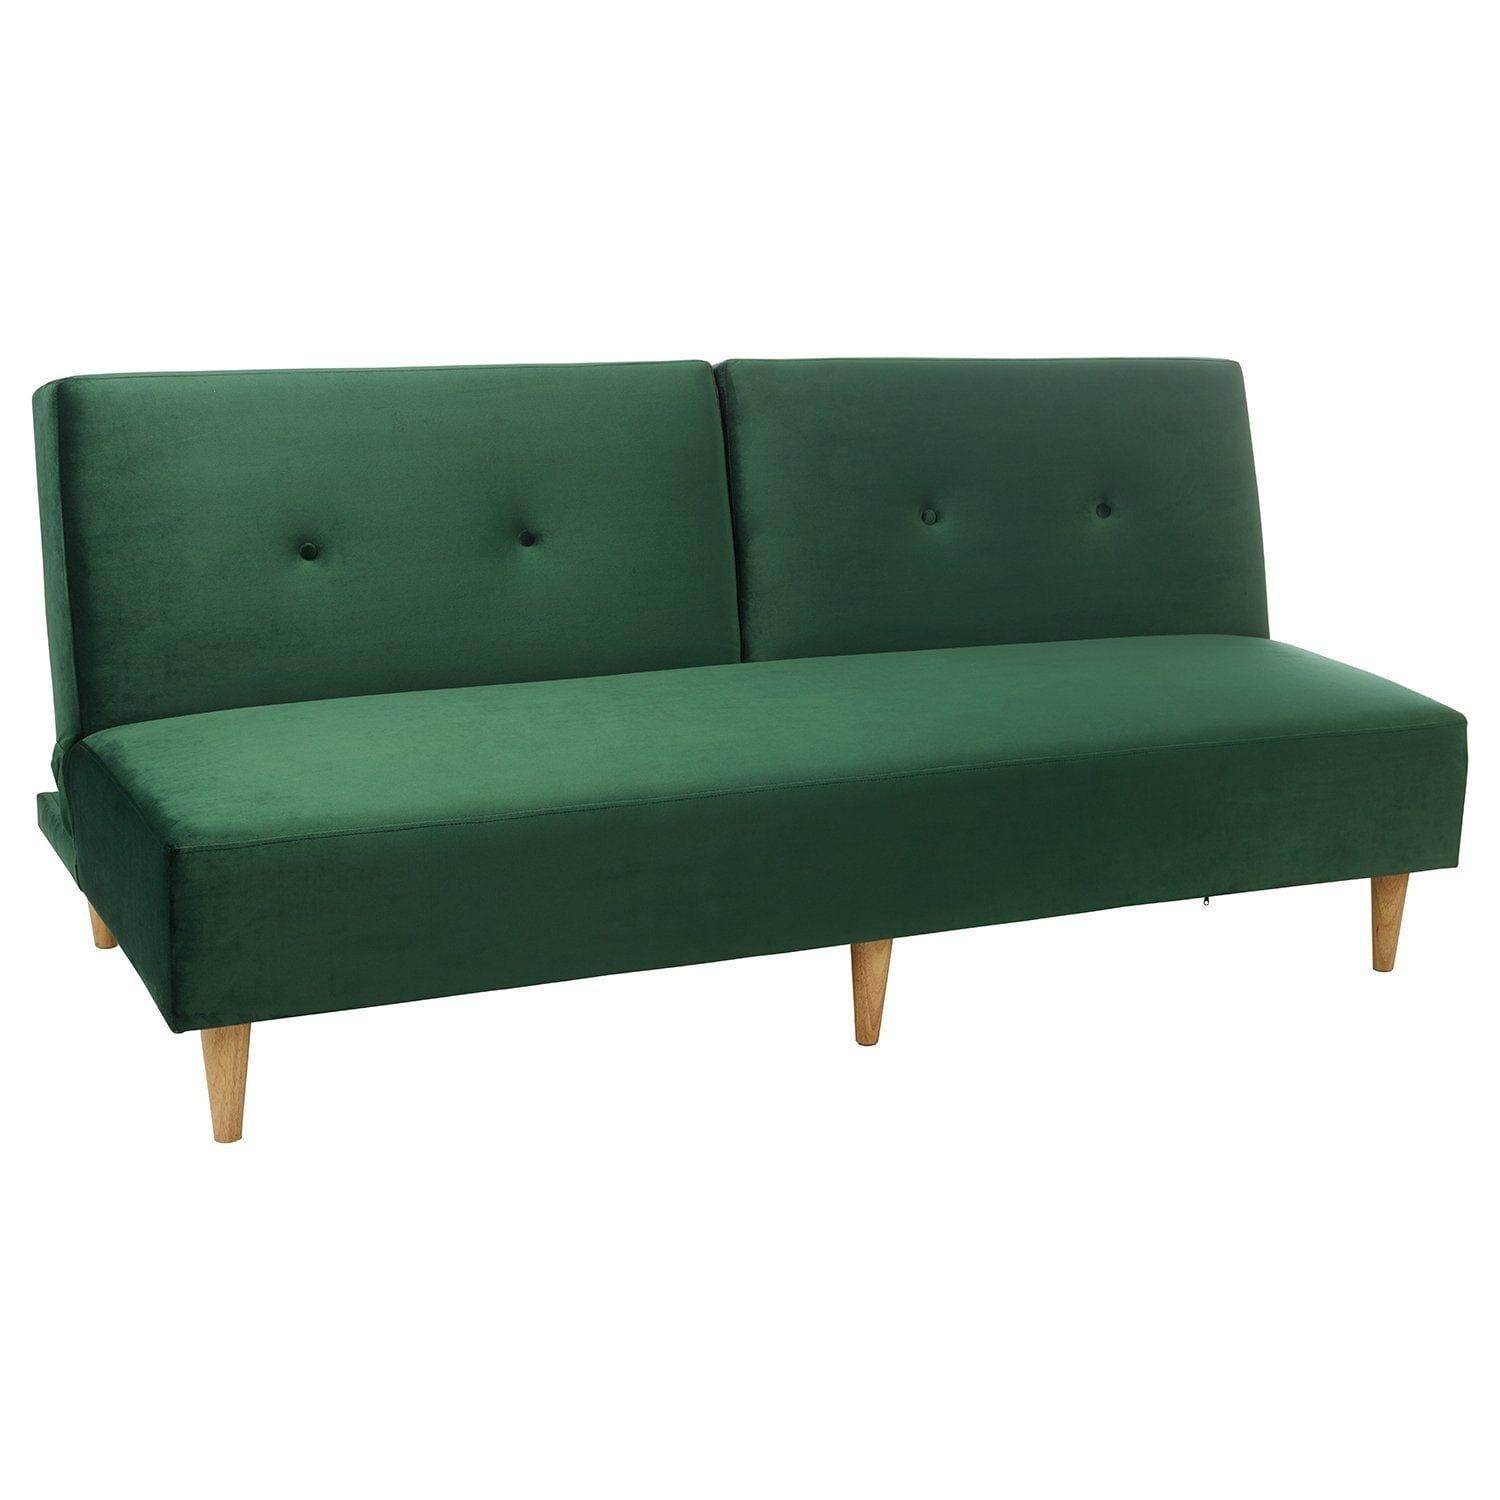 Outlet - Tamsin click clack sofa bed - green velvet - Laura James